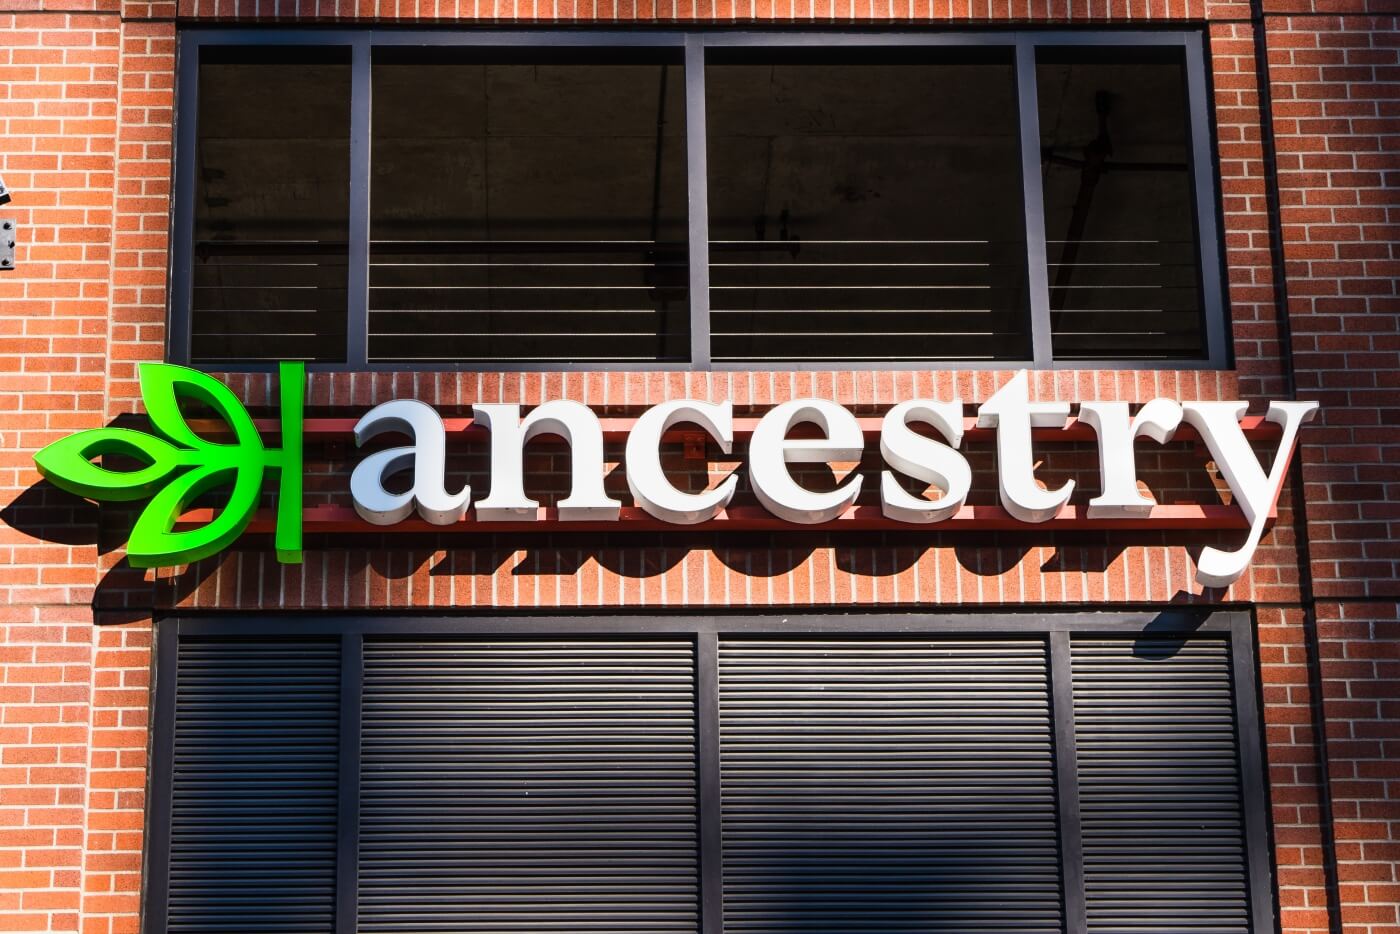 Ancestry lays off 100 employees as consumer interest in DNA testing continues to wane